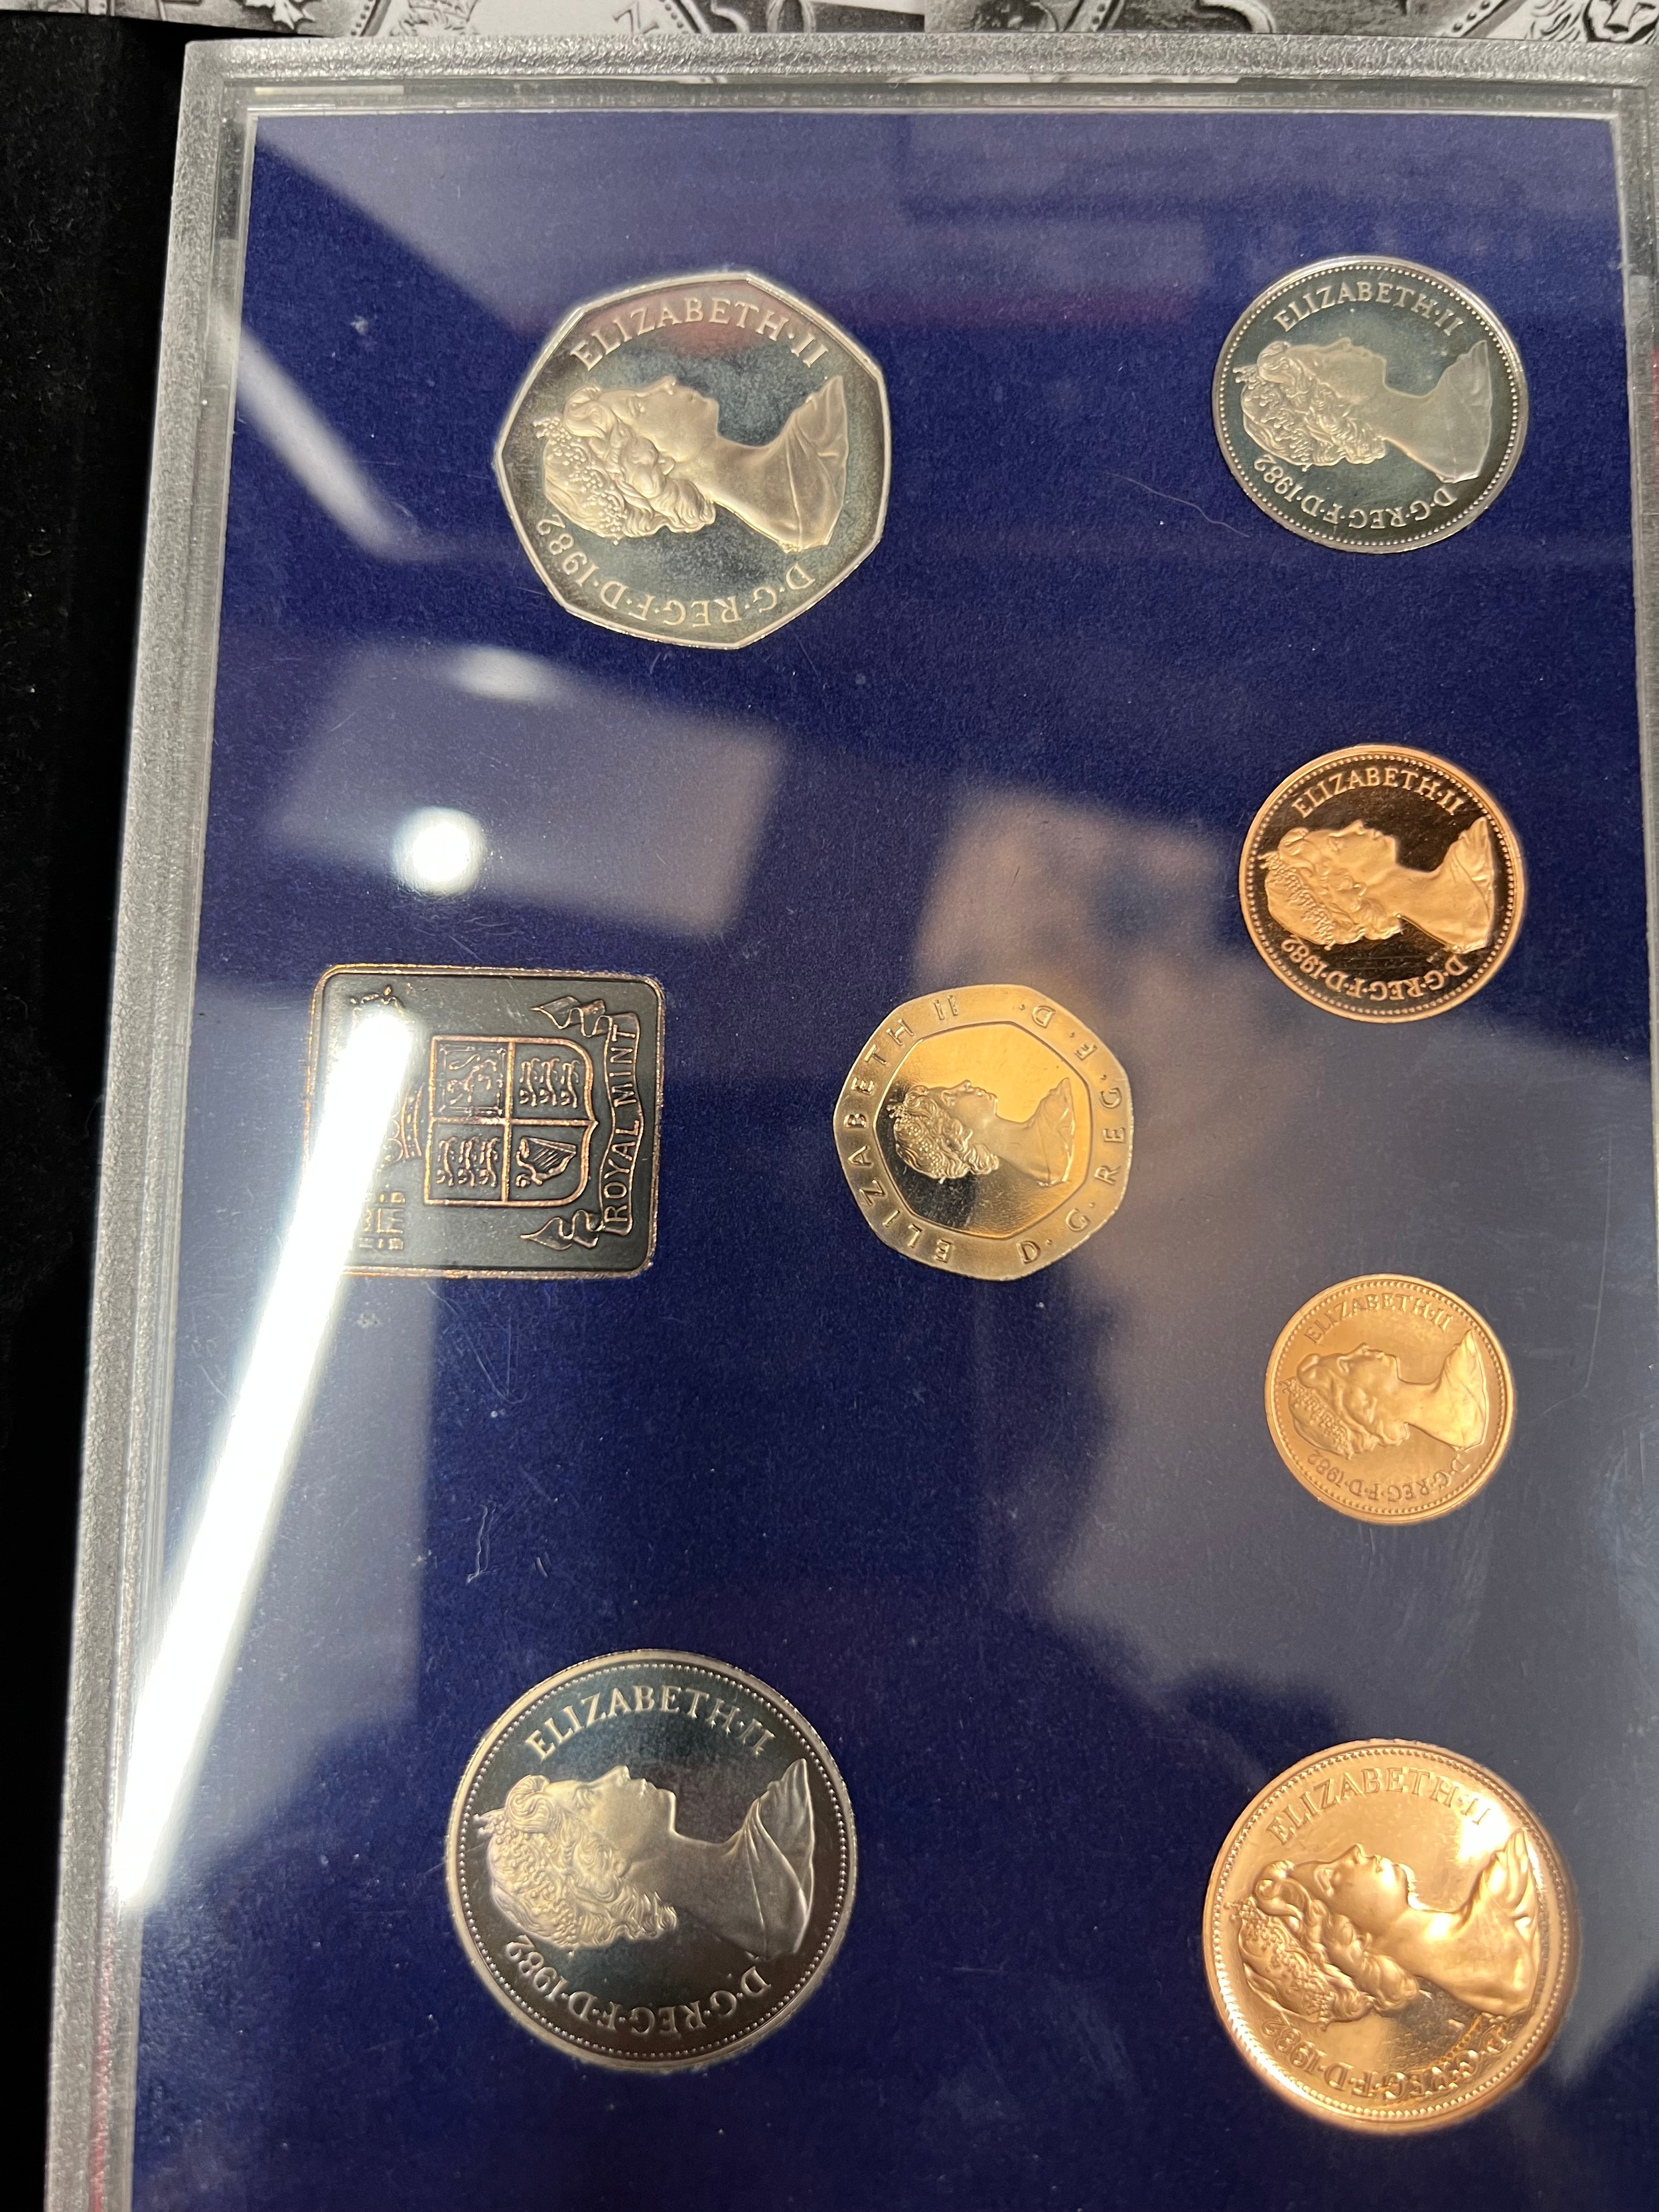 Royal mint proof sets x 3 to include 1973, 1981, 1982 in with presentation case, certificates for 81 - Image 3 of 4